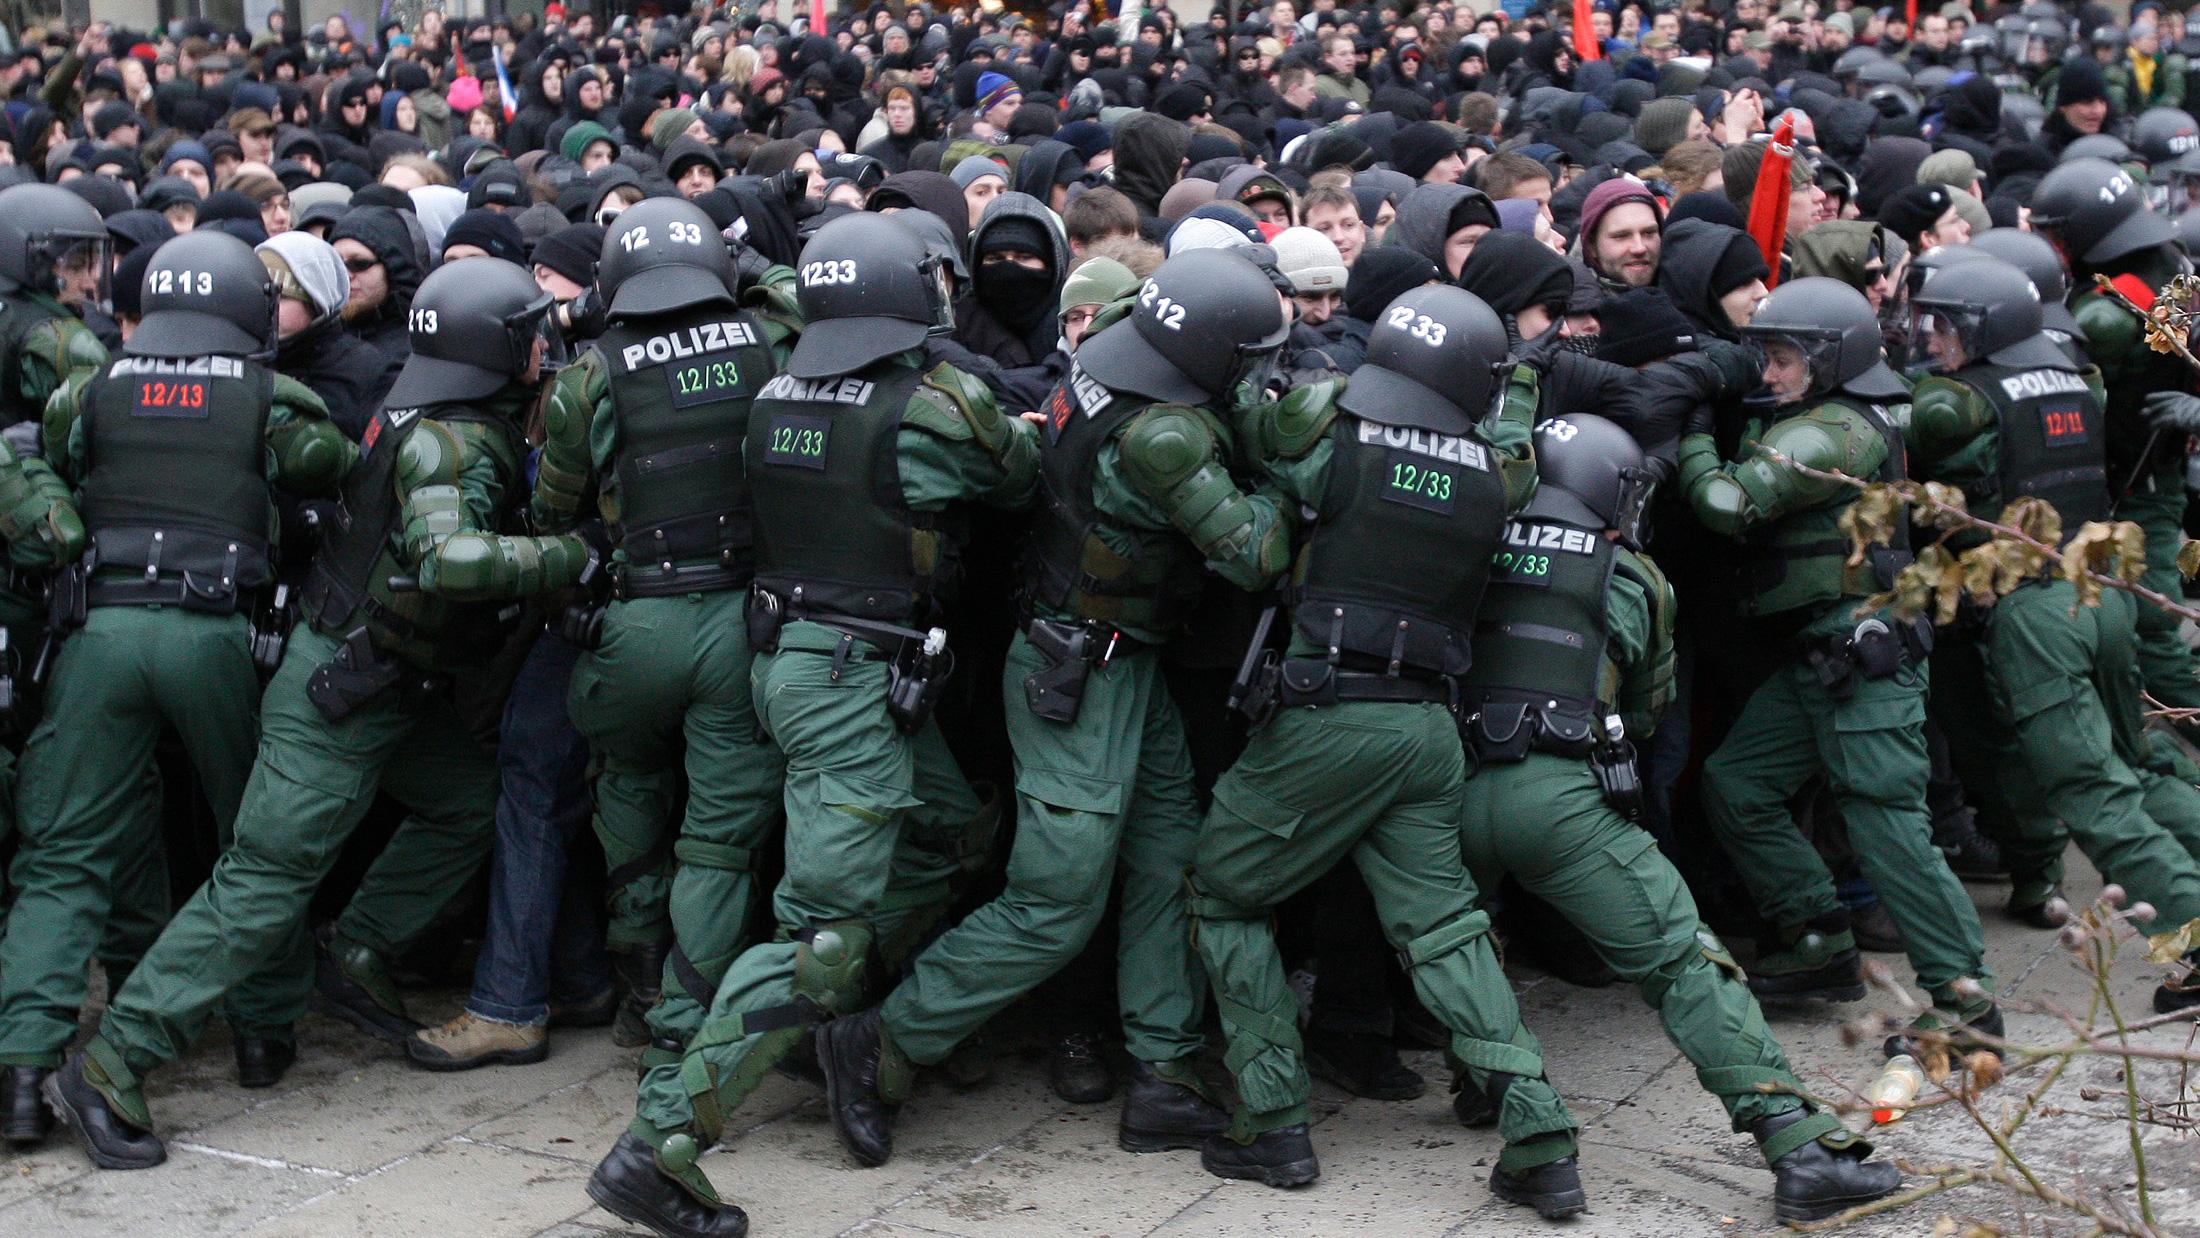 The photo shows a line of uniformed riot gear officers pushing hard against a scrum of protesters. 